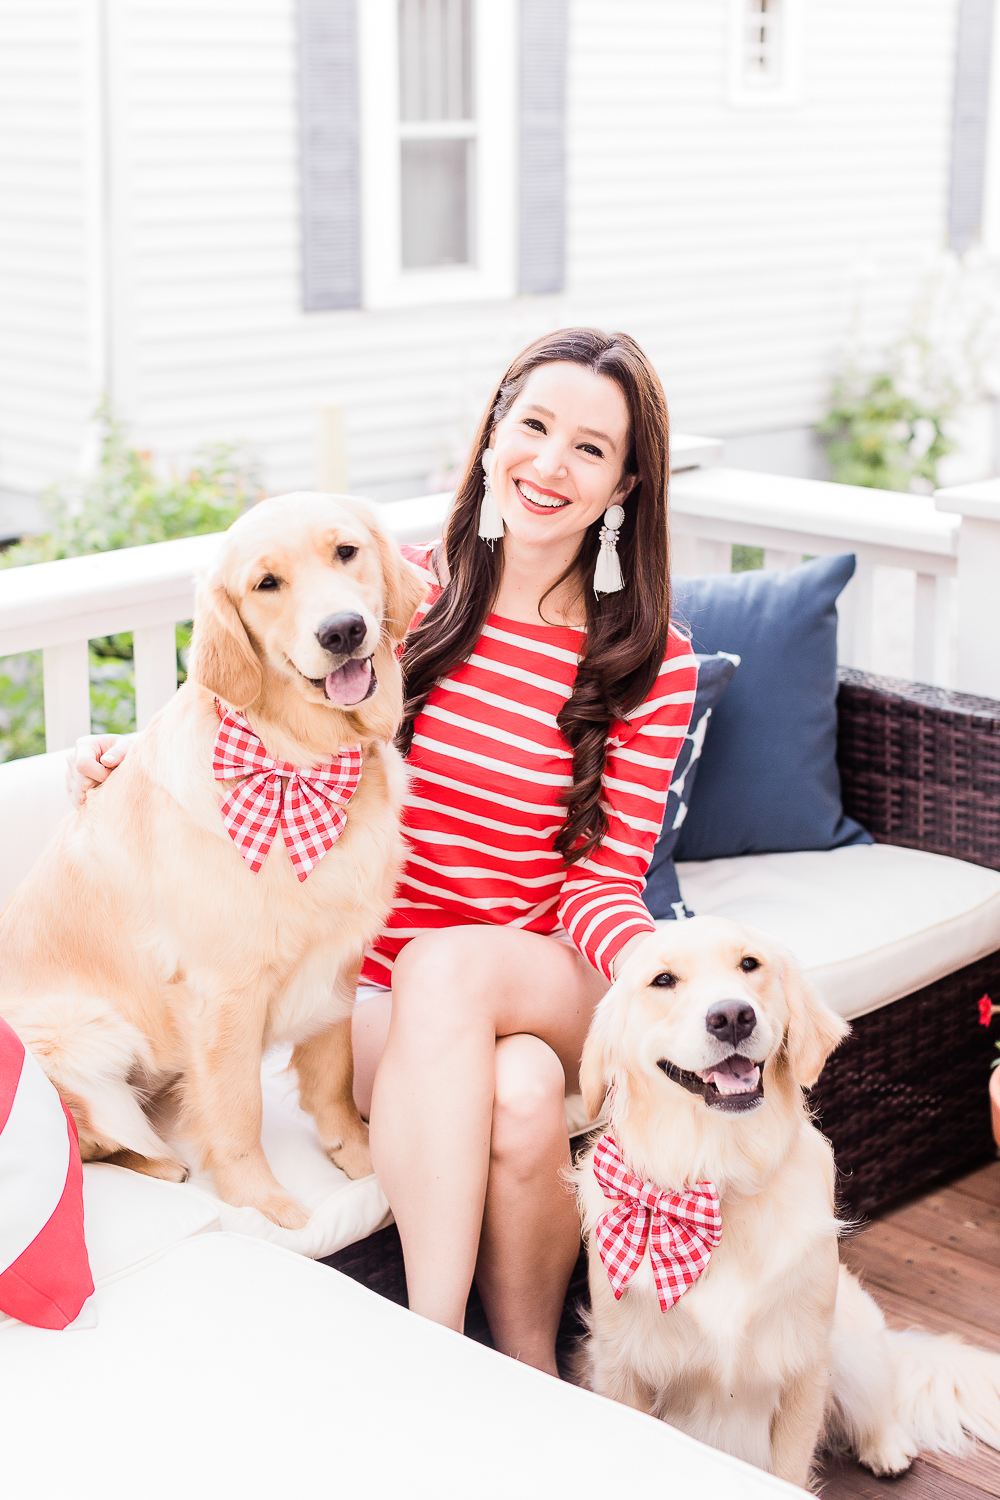 4th of July golden retrievers, 4th of July puppies, red gingham dog bows and collars, Currently Obsessed: Cute Female Dog Bows for Large Breeds by popular southern lifestyle blogger and golden retriever dog mom Stephanie Ziajka from Diary of a Debutante, how to make dog bows stay in, designer dog bows, female dog bows, 4th of July dog bows, cute dog bows for large breeds